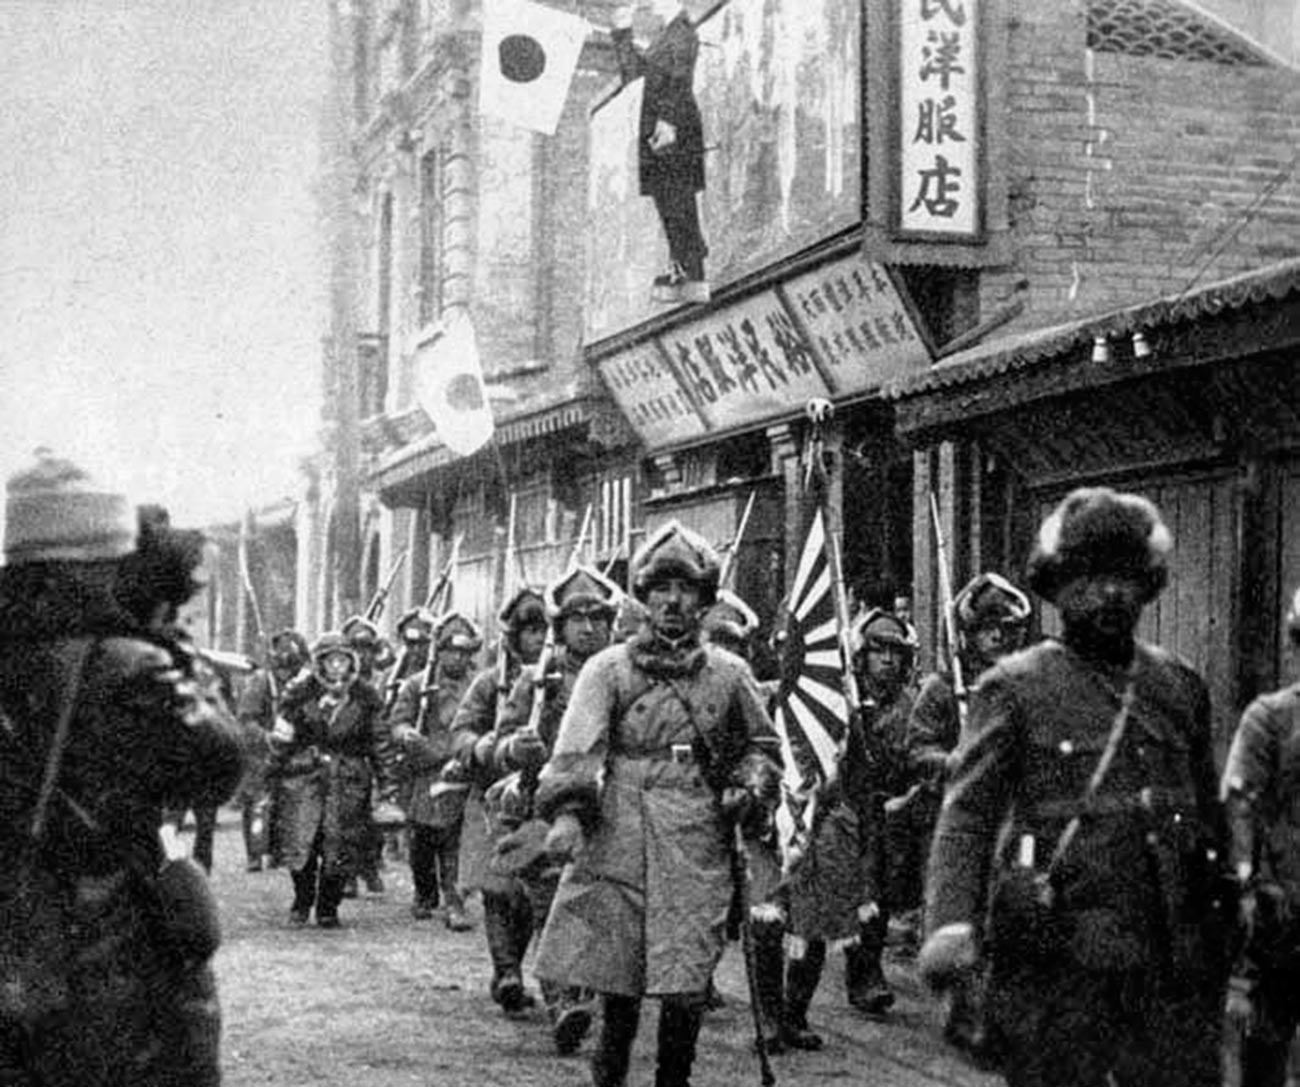 Japanese troops entering Chinchow.